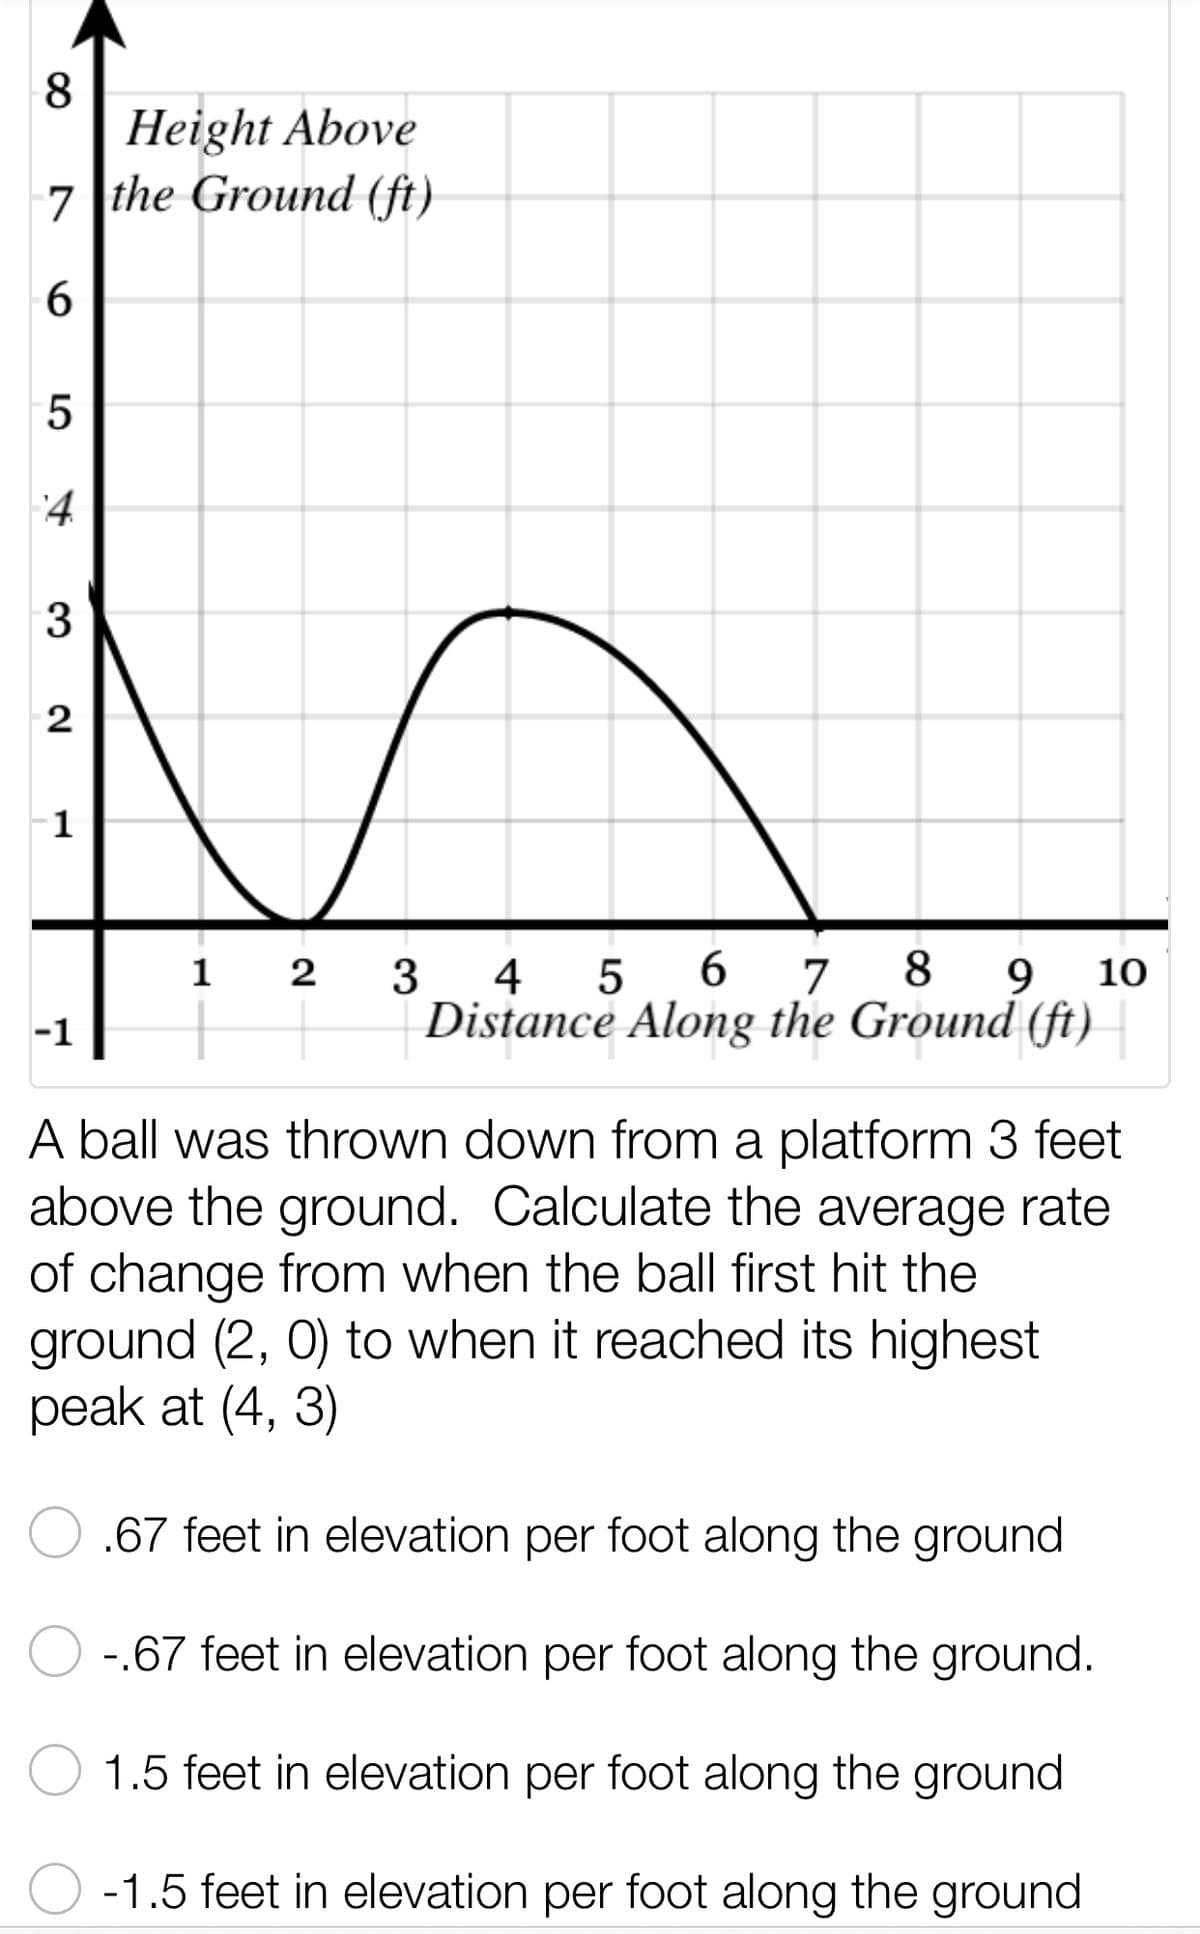 8
Height Above
7 the Ground (ft)
6
5
4
3
2
1
-1
1 2
3 4 5 6 7 8 9 10
Distance Along the Ground (ft)
A ball was thrown down from a platform 3 feet
above the ground. Calculate the average rate
of change from when the ball first hit the
ground (2, 0) to when it reached its highest
peak at (4, 3)
.67 feet in elevation per foot along the ground
-.67 feet in elevation per foot along the ground.
1.5 feet in elevation per foot along the ground
-1.5 feet in elevation per foot along the ground